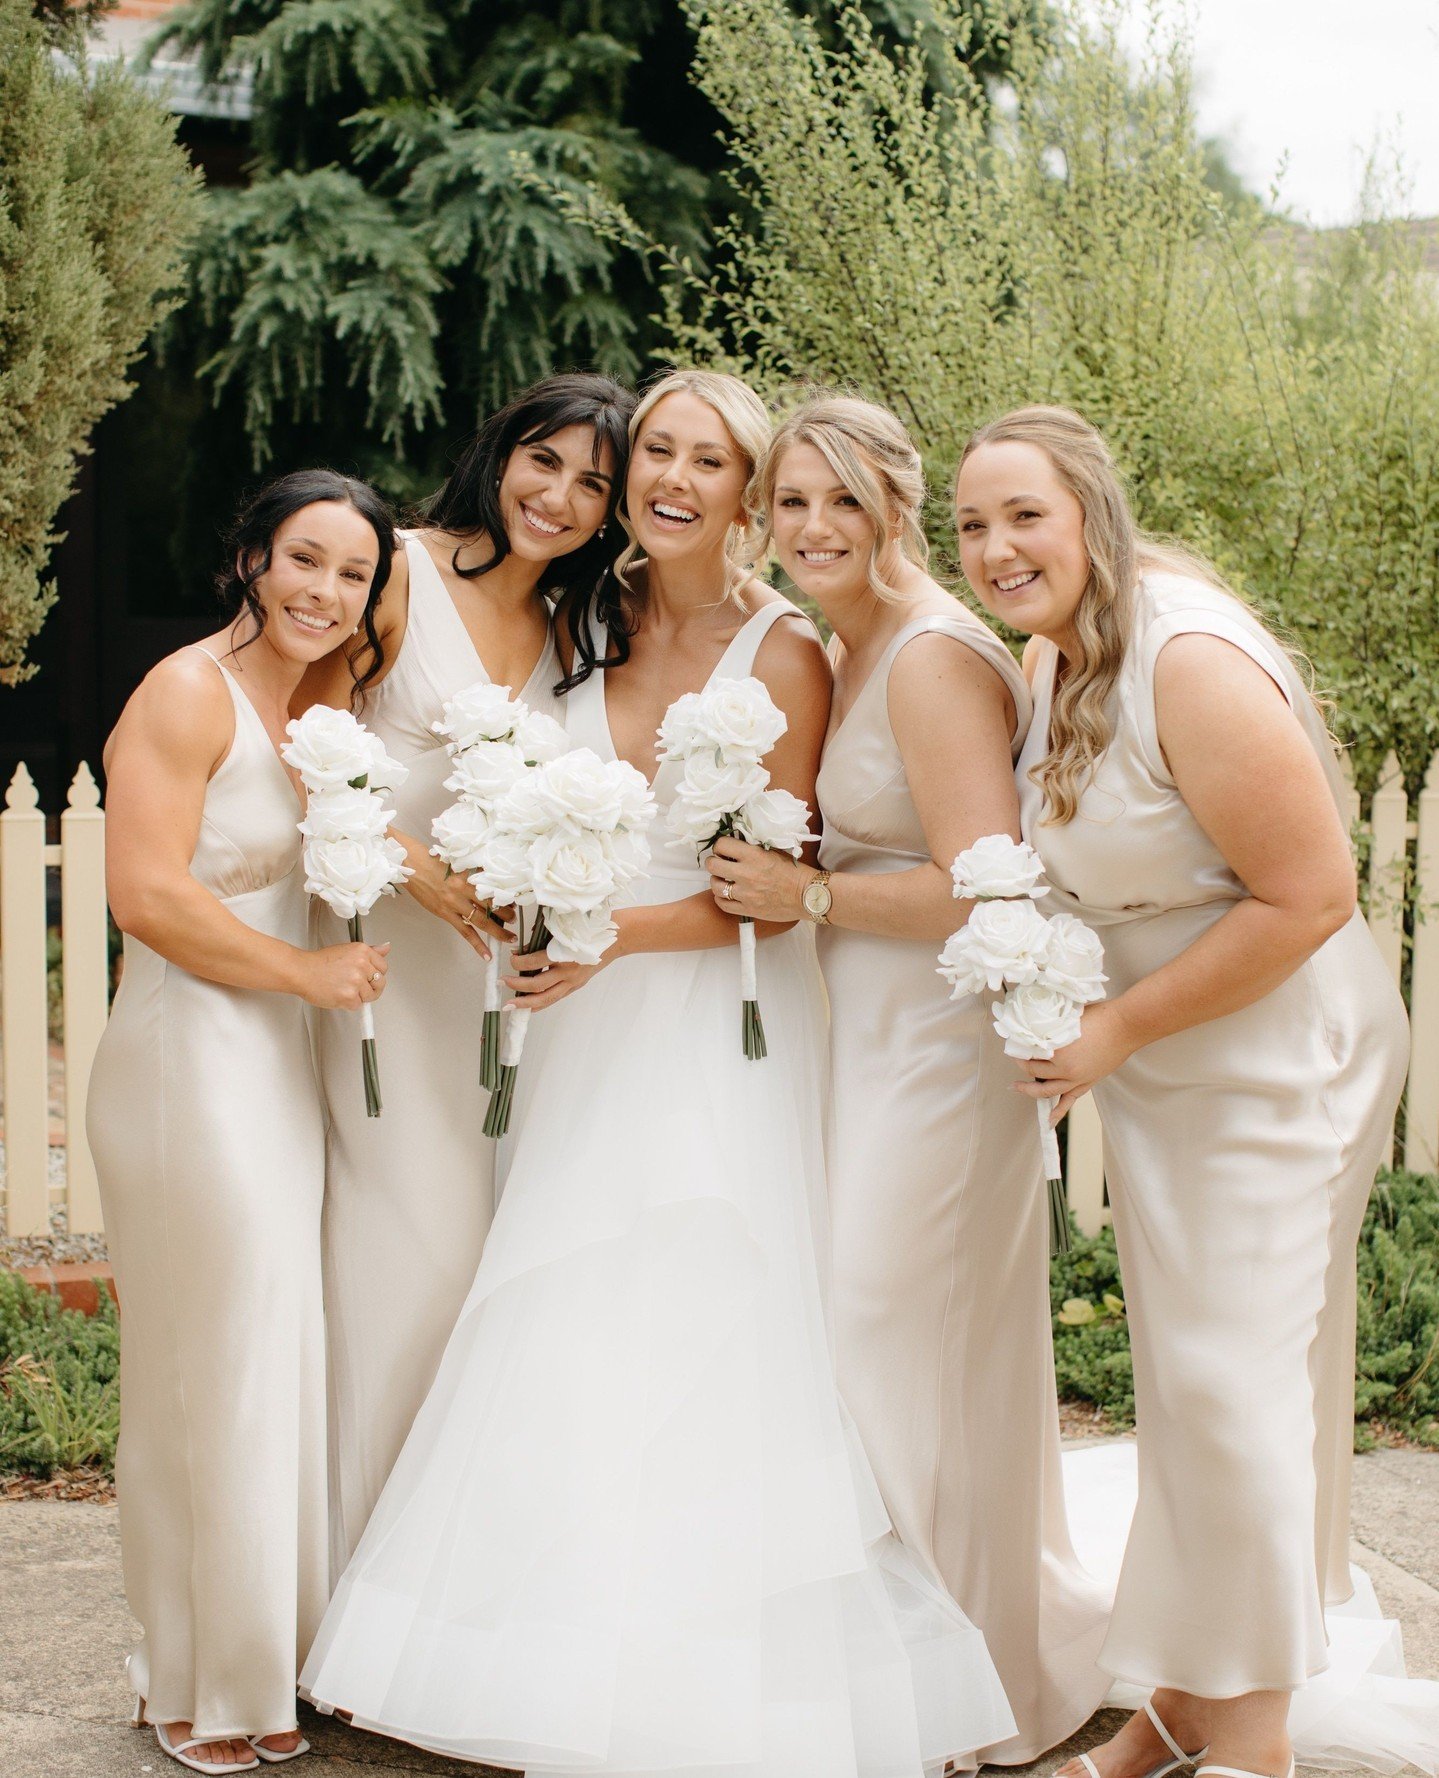 Beautiful bride Shay wore #CZ22571 on her special day. 🕊️⁠
⁠
Wedding Planner &amp; Stylist: @wearehosted⁠
Venue: @eastloddonwoolshed⁠
Photographer: @whitesandwoods⁠
Hair: @hairfolksalon⁠
Makeup: @demiryanmakeup⁠
Floristry: @the.newleafboutique⁠
Stat